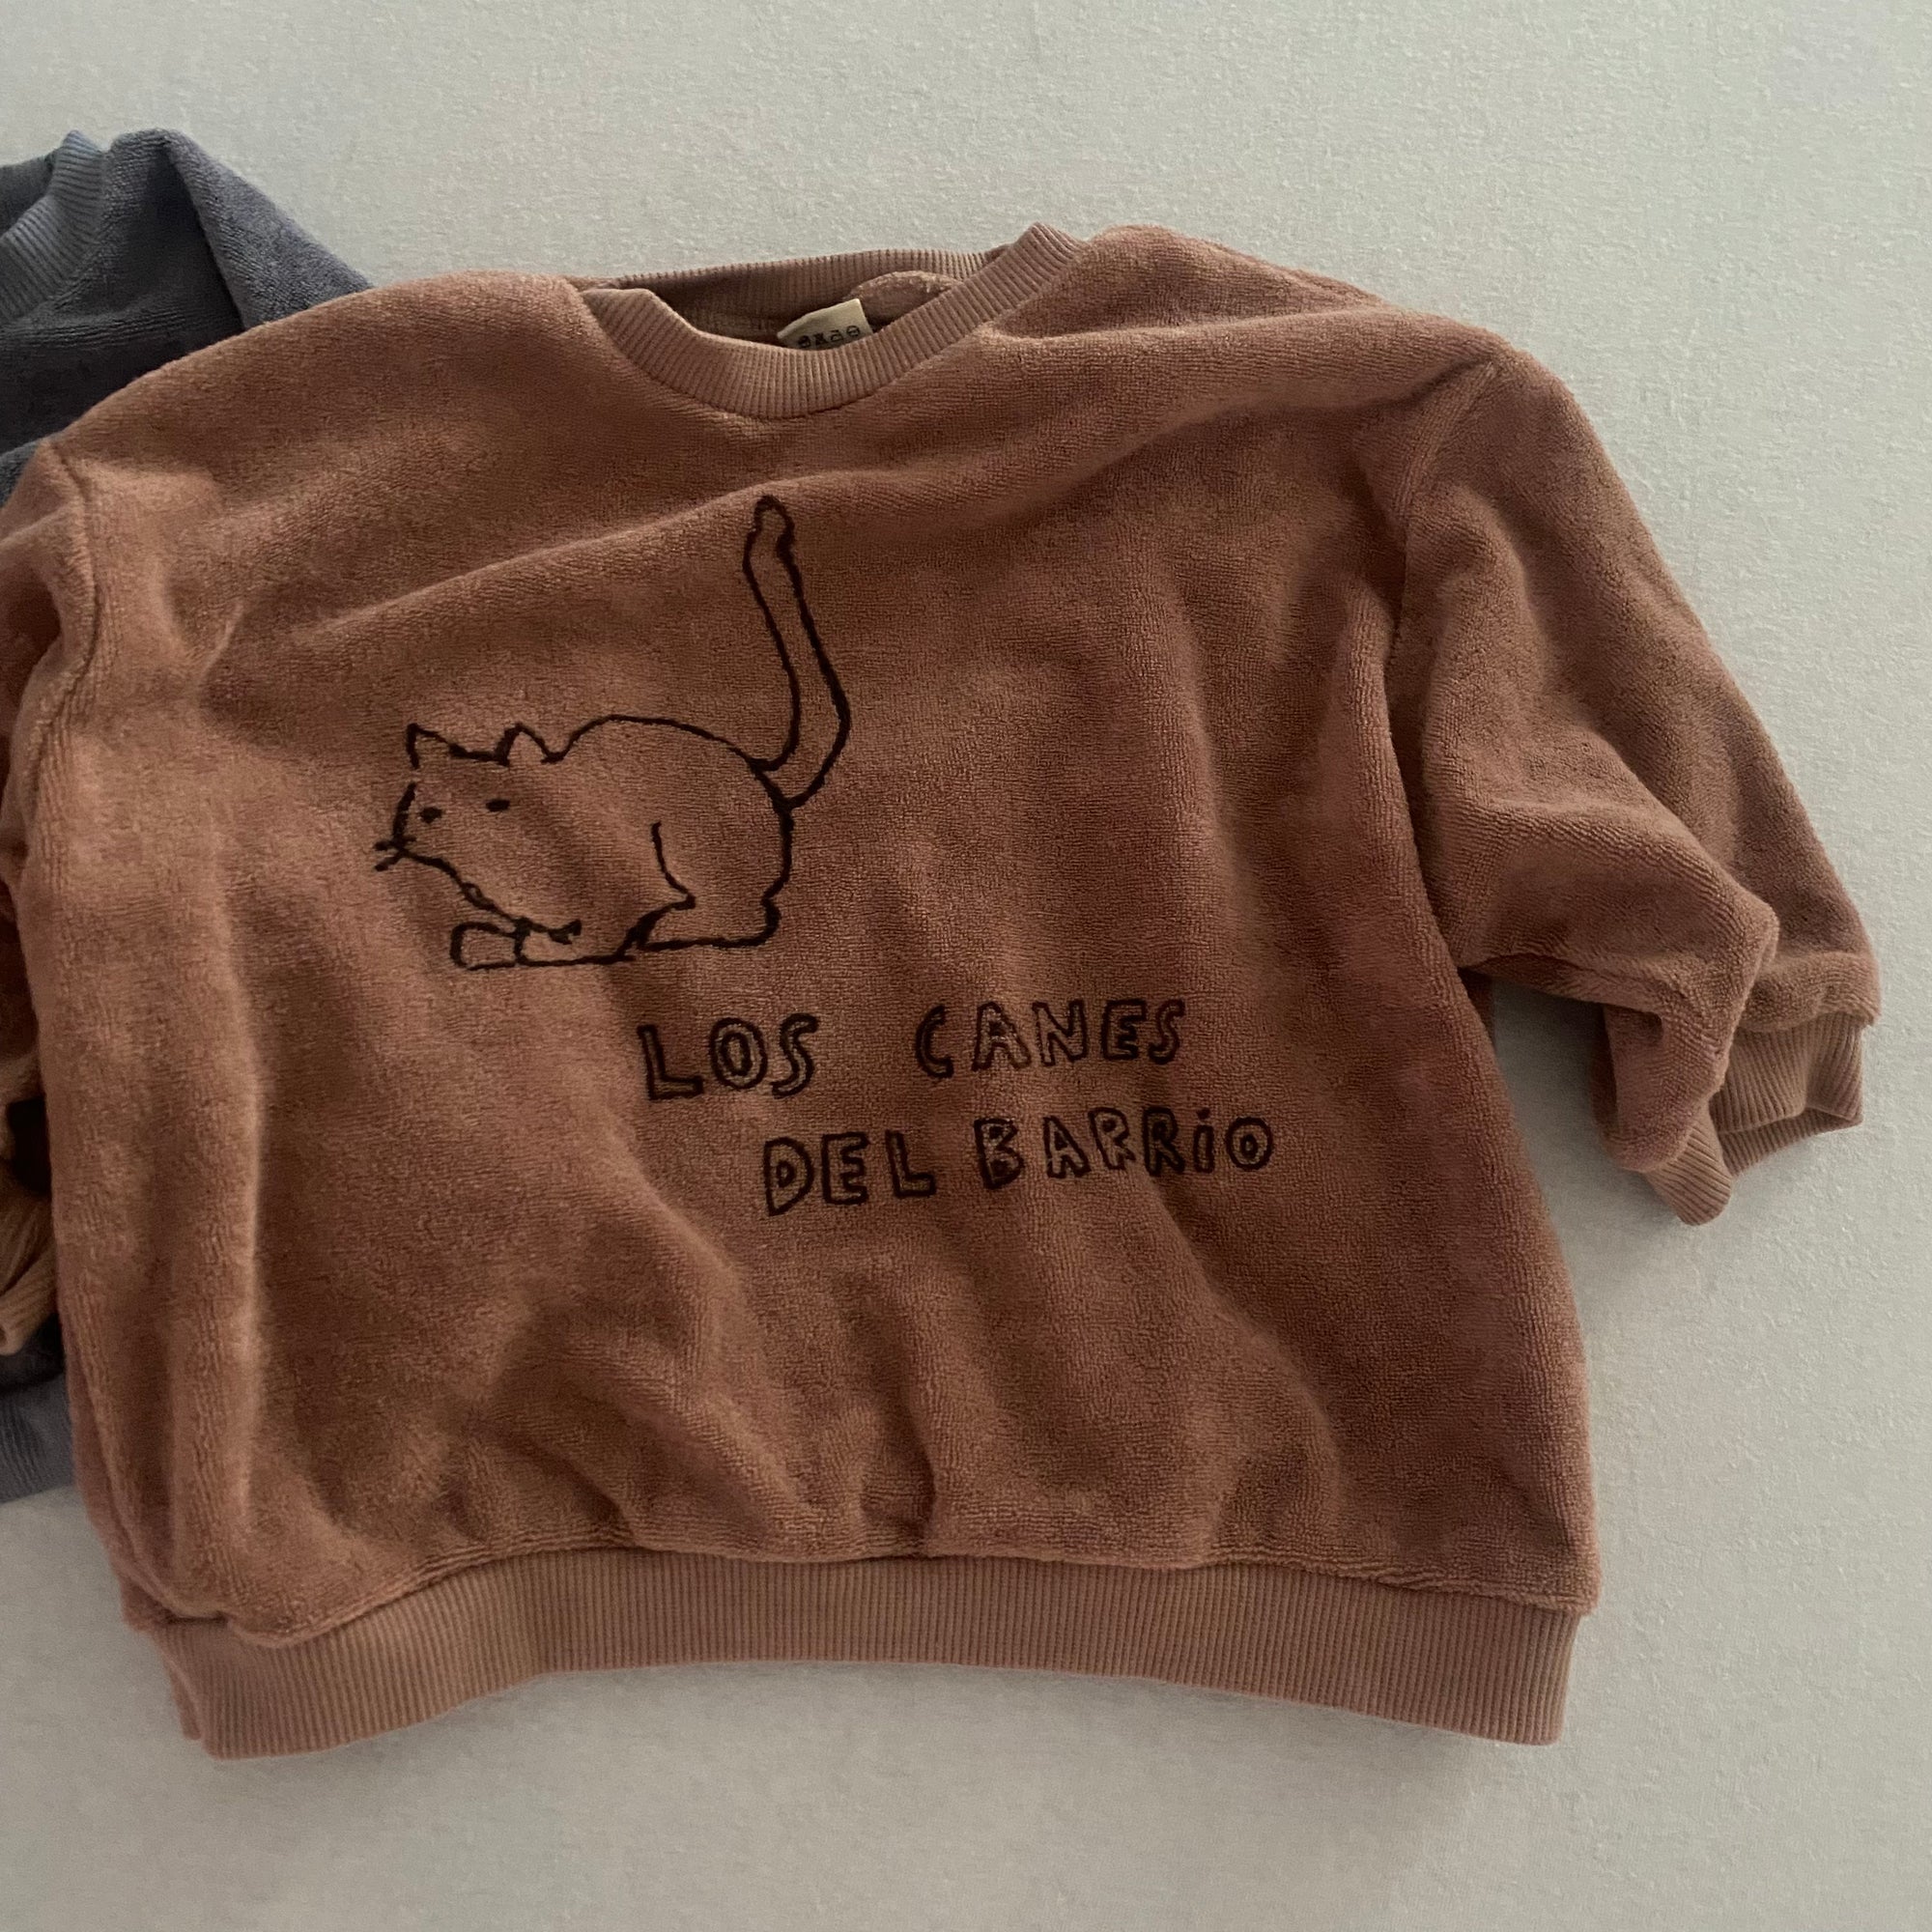 Mini Cozy Cat Sweater find Stylish Fashion for Little People- at Little Foxx Concept Store